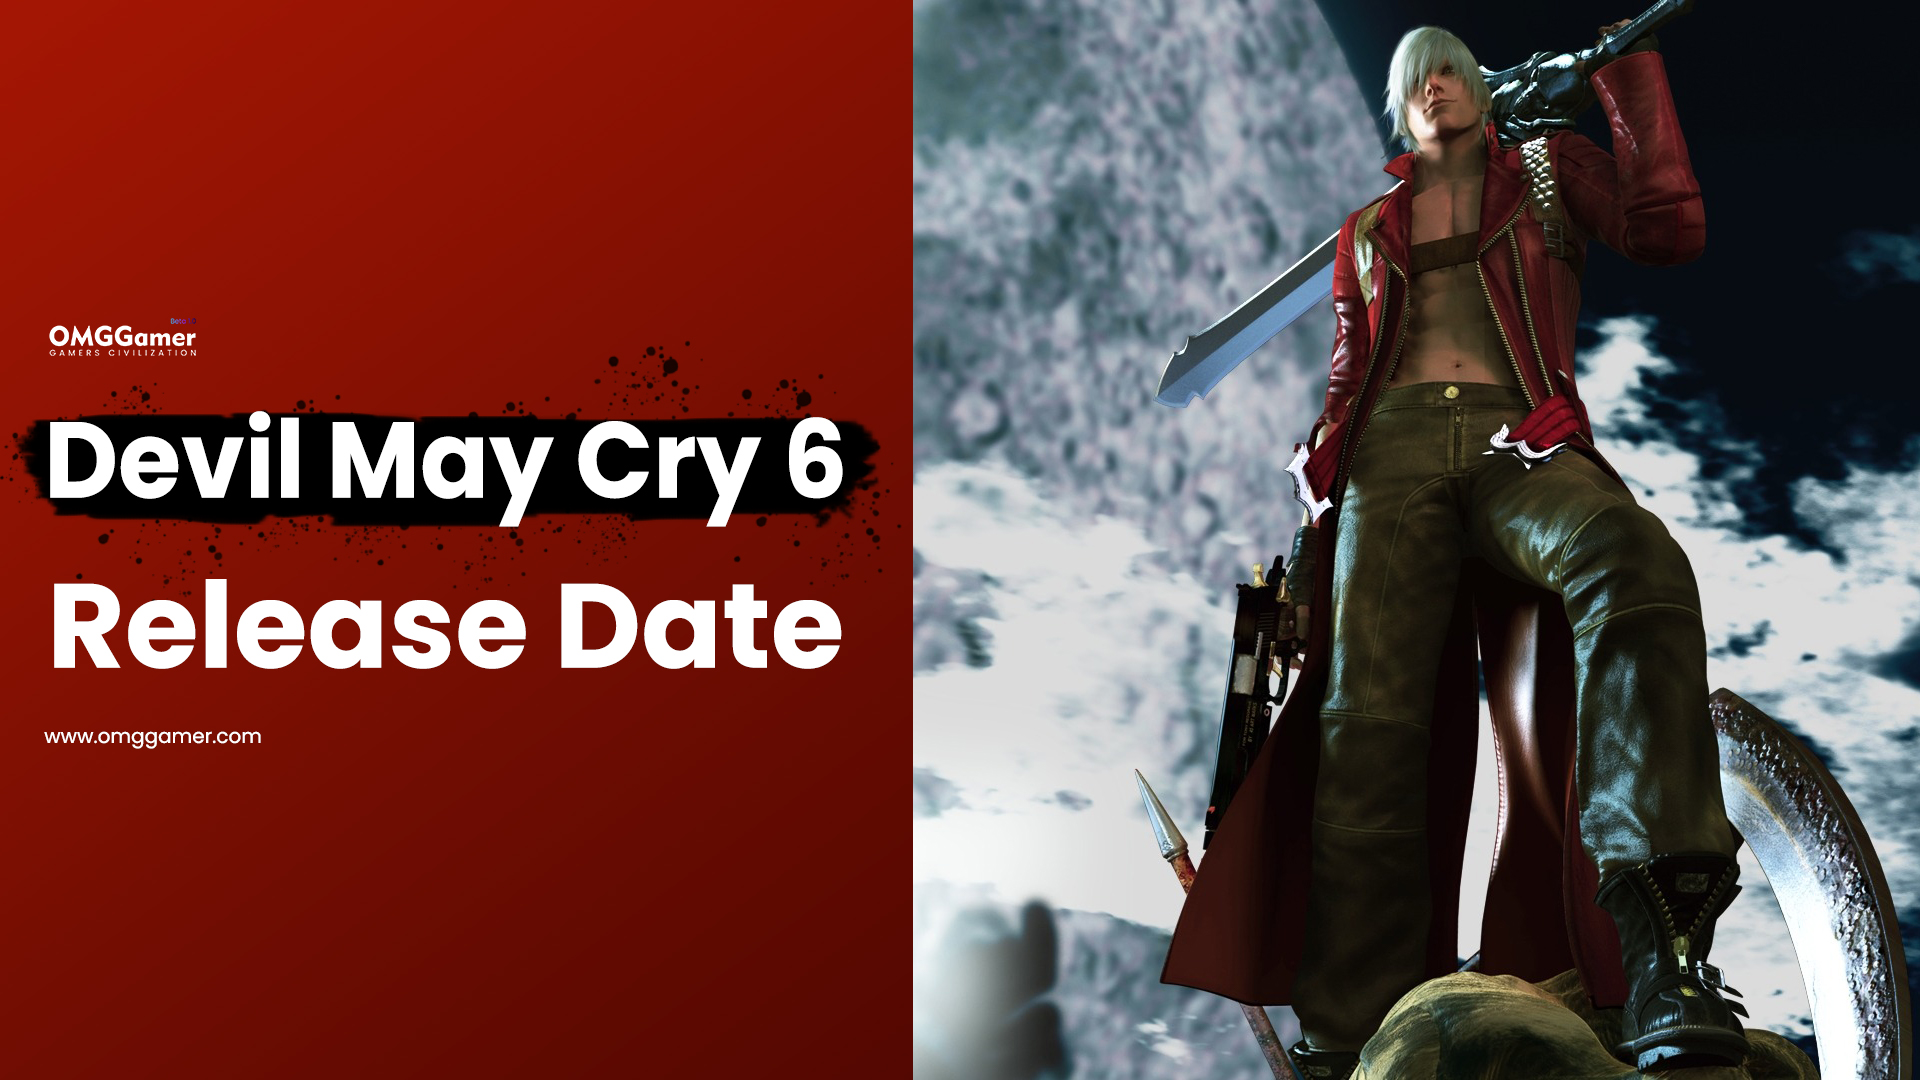 Devil May Cry 6 Release Date